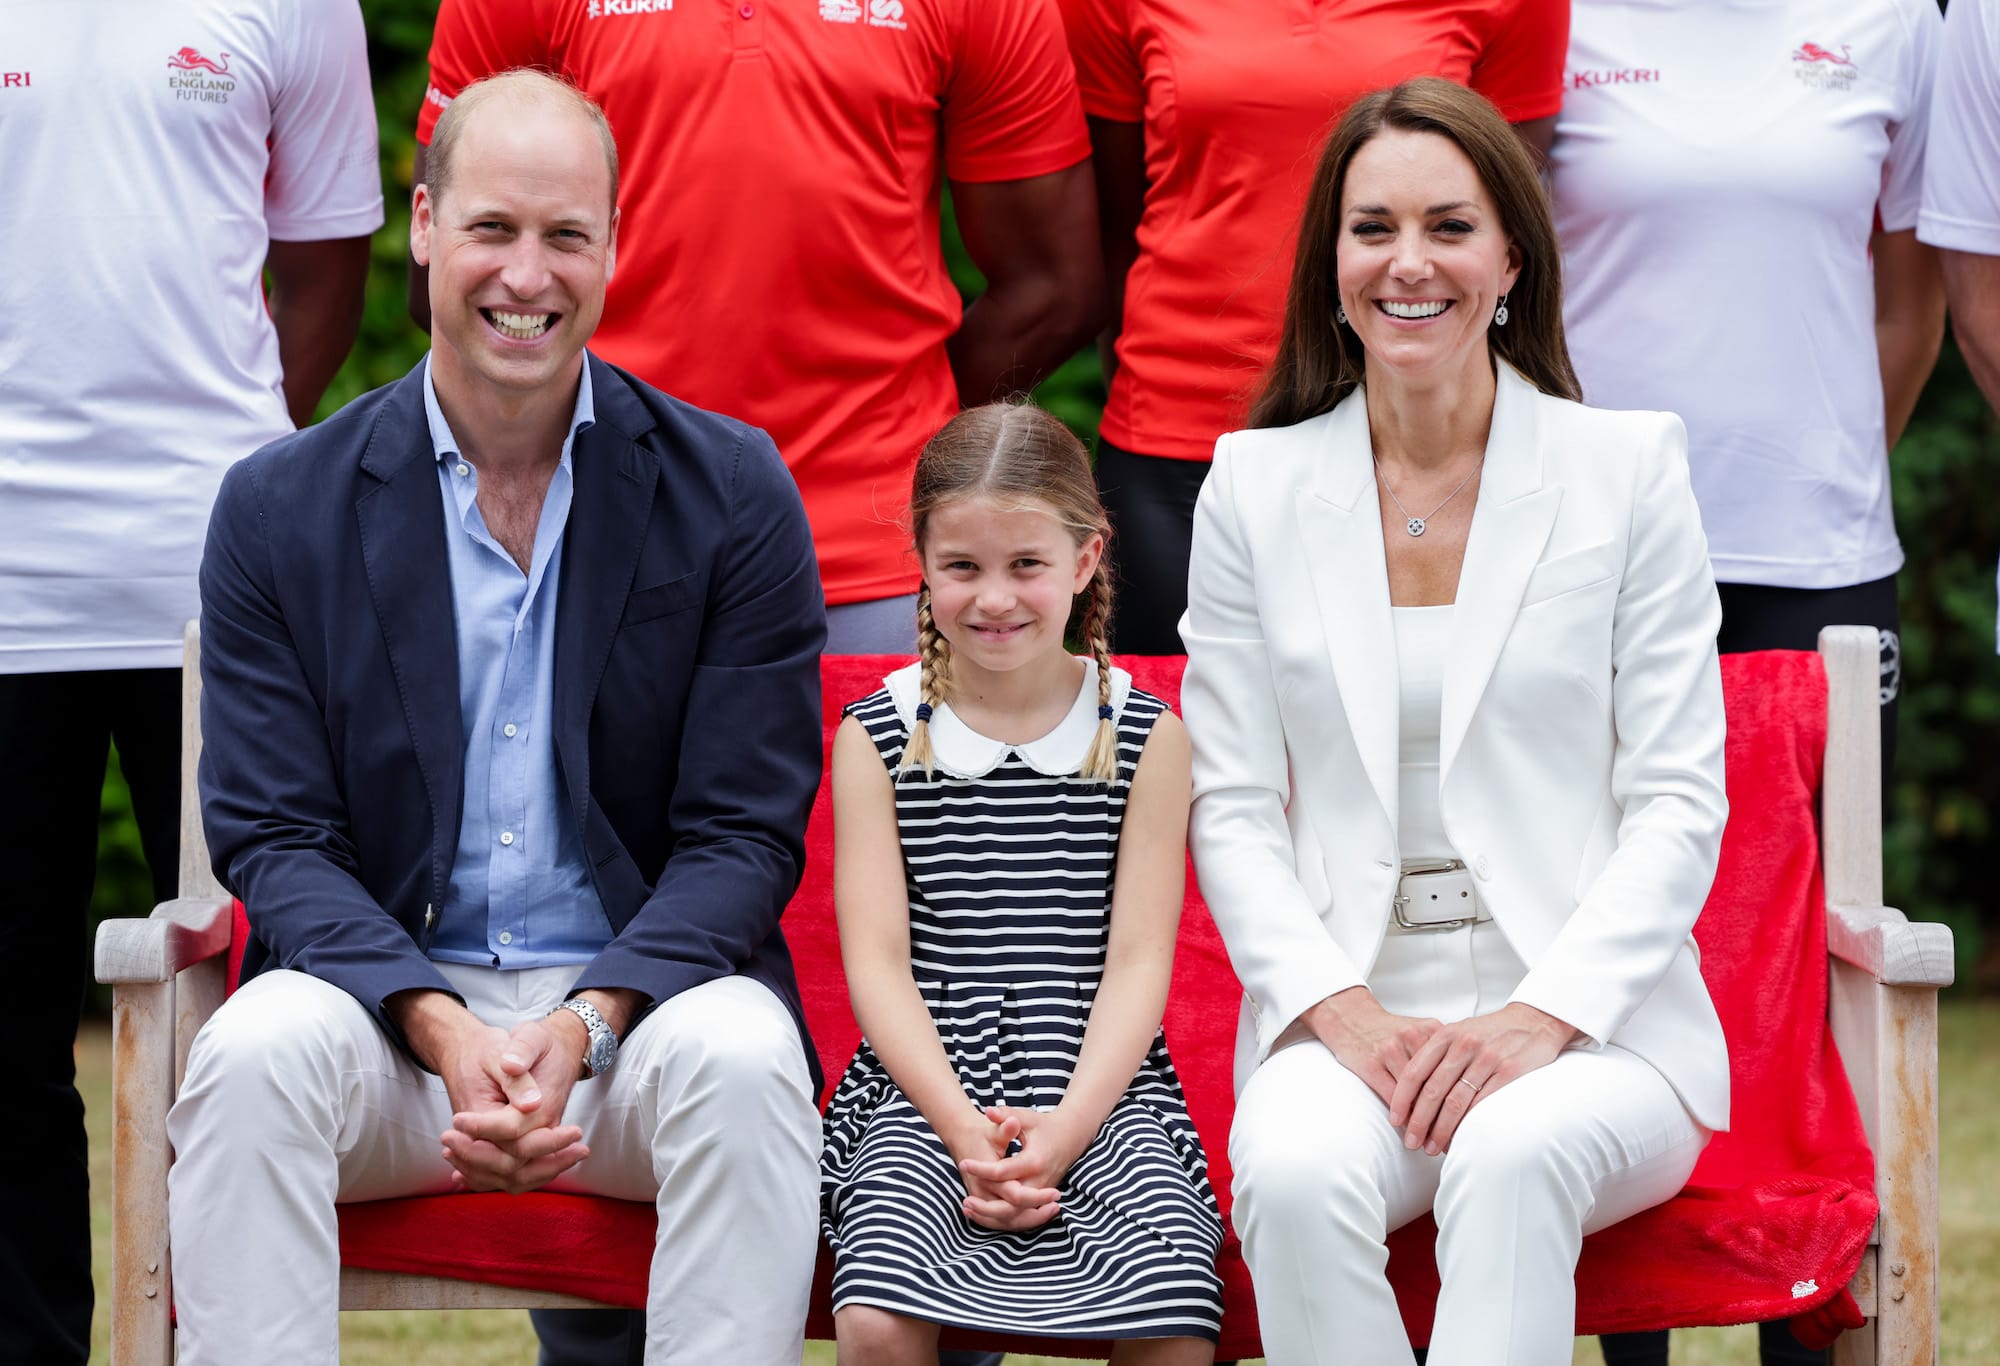 Prince William, Duke of Cambridge and Catherine, Duchess of Cambridge Kate Middleton with their daughter Princess Charlotte of Cambridge at the 2022 Commonwealth Games.